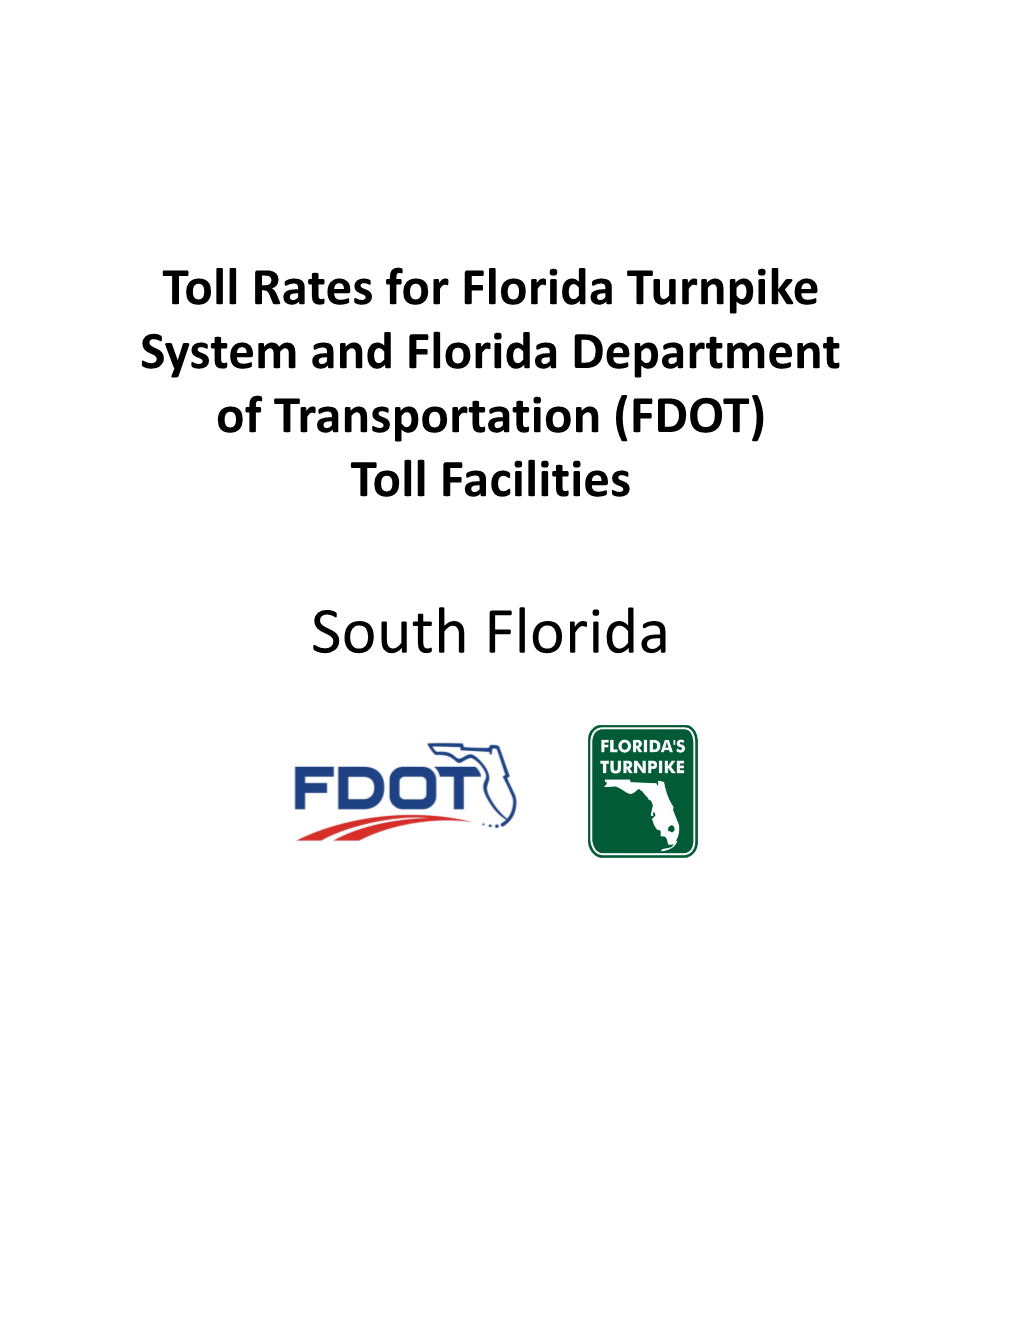 Toll Rates for Florida Turnpike System and Florida Department of Transportation (FDOT) Toll Facilities